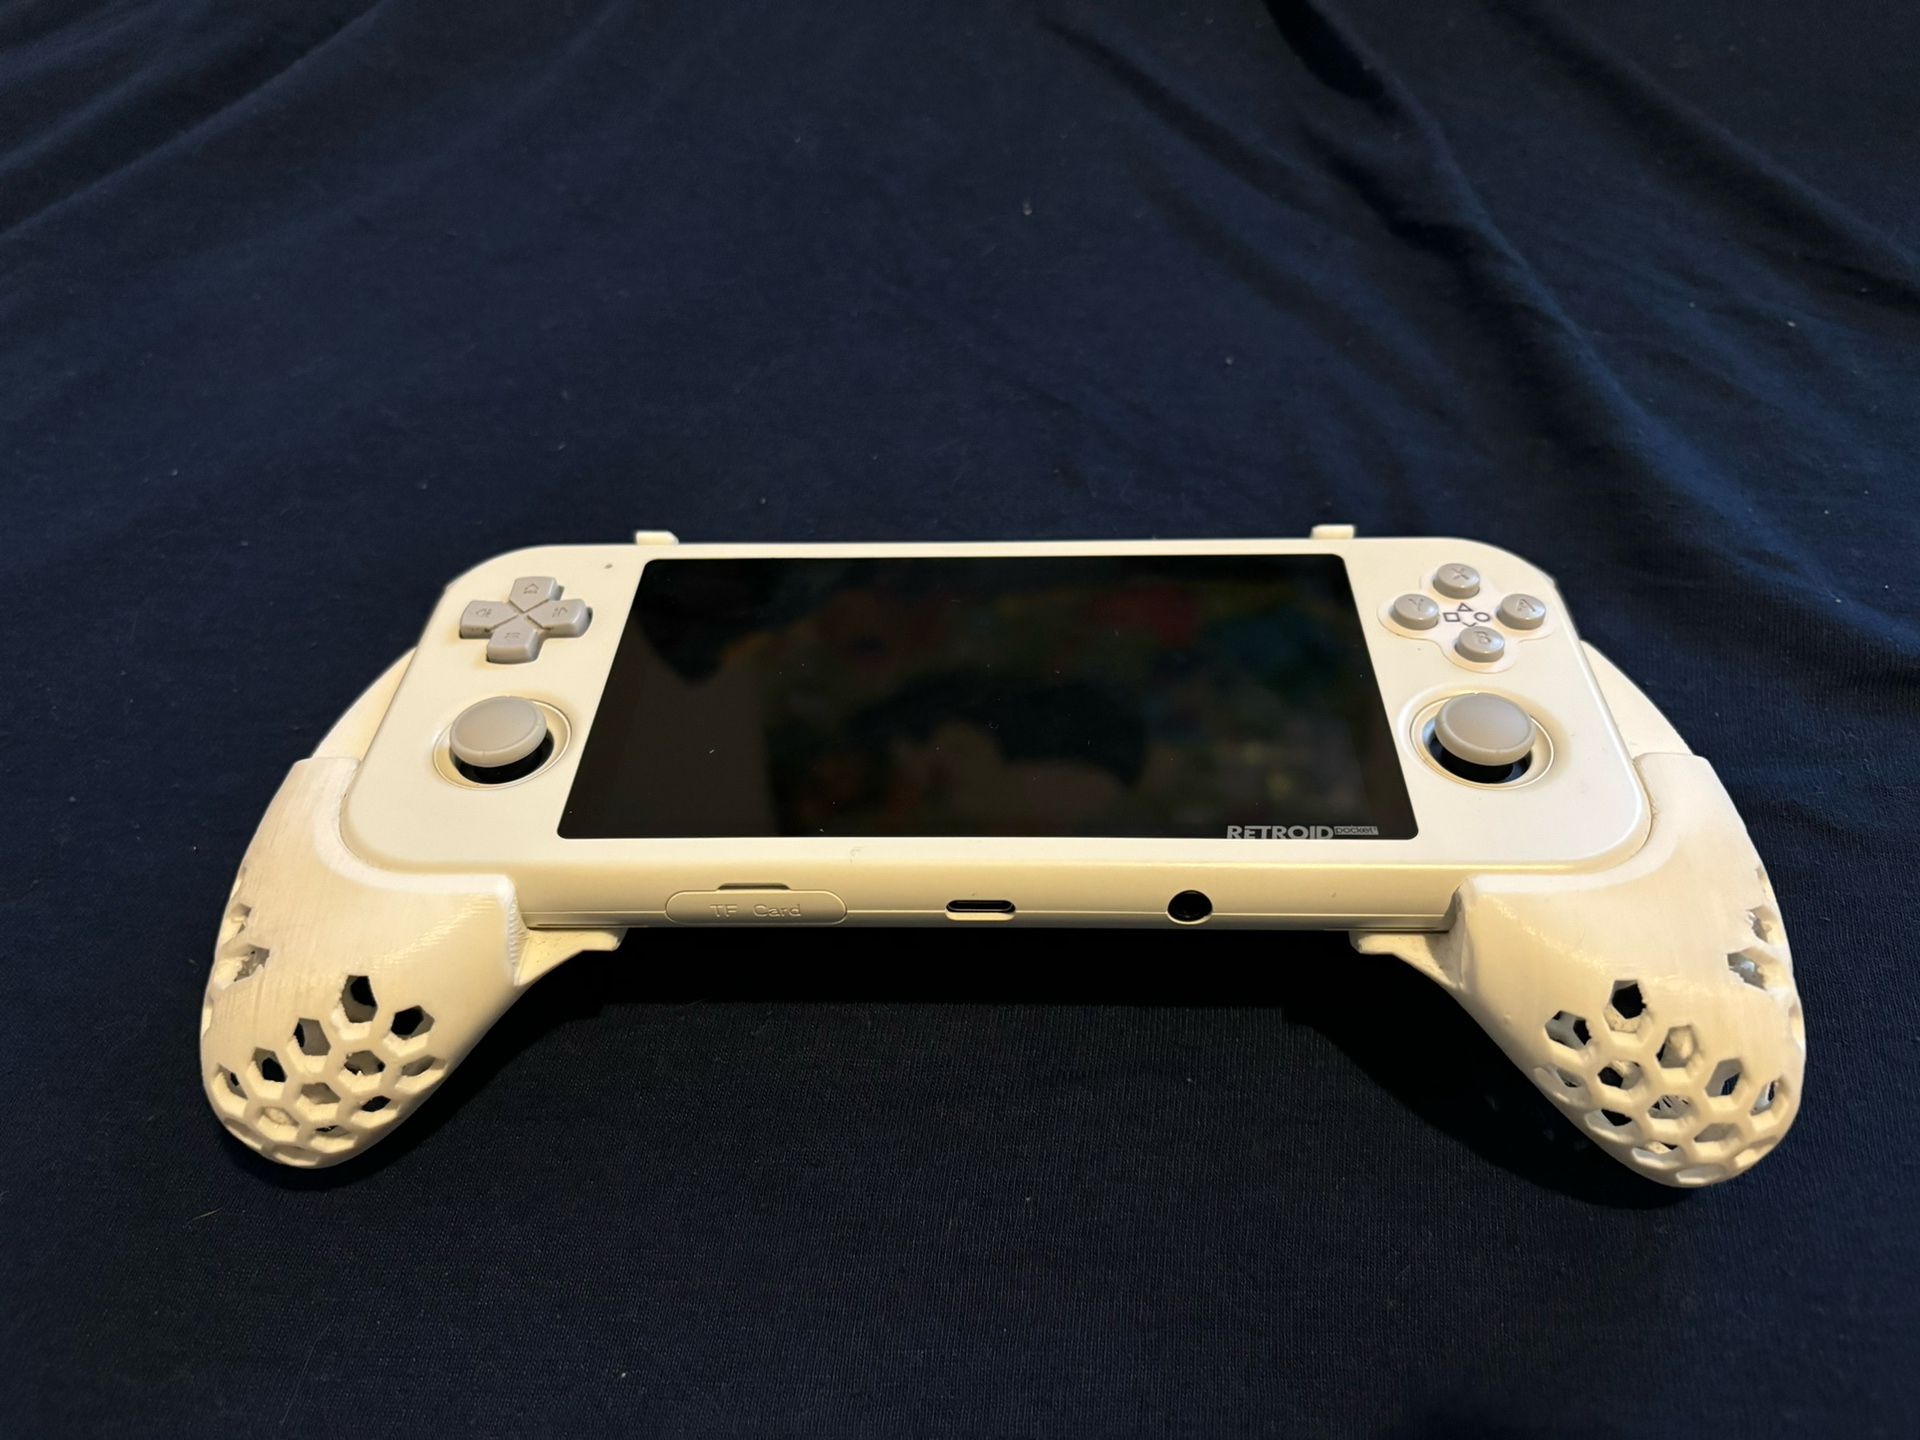 Retroid Pocket 3+ Gaming Emulator (with 3D Printed Grips)